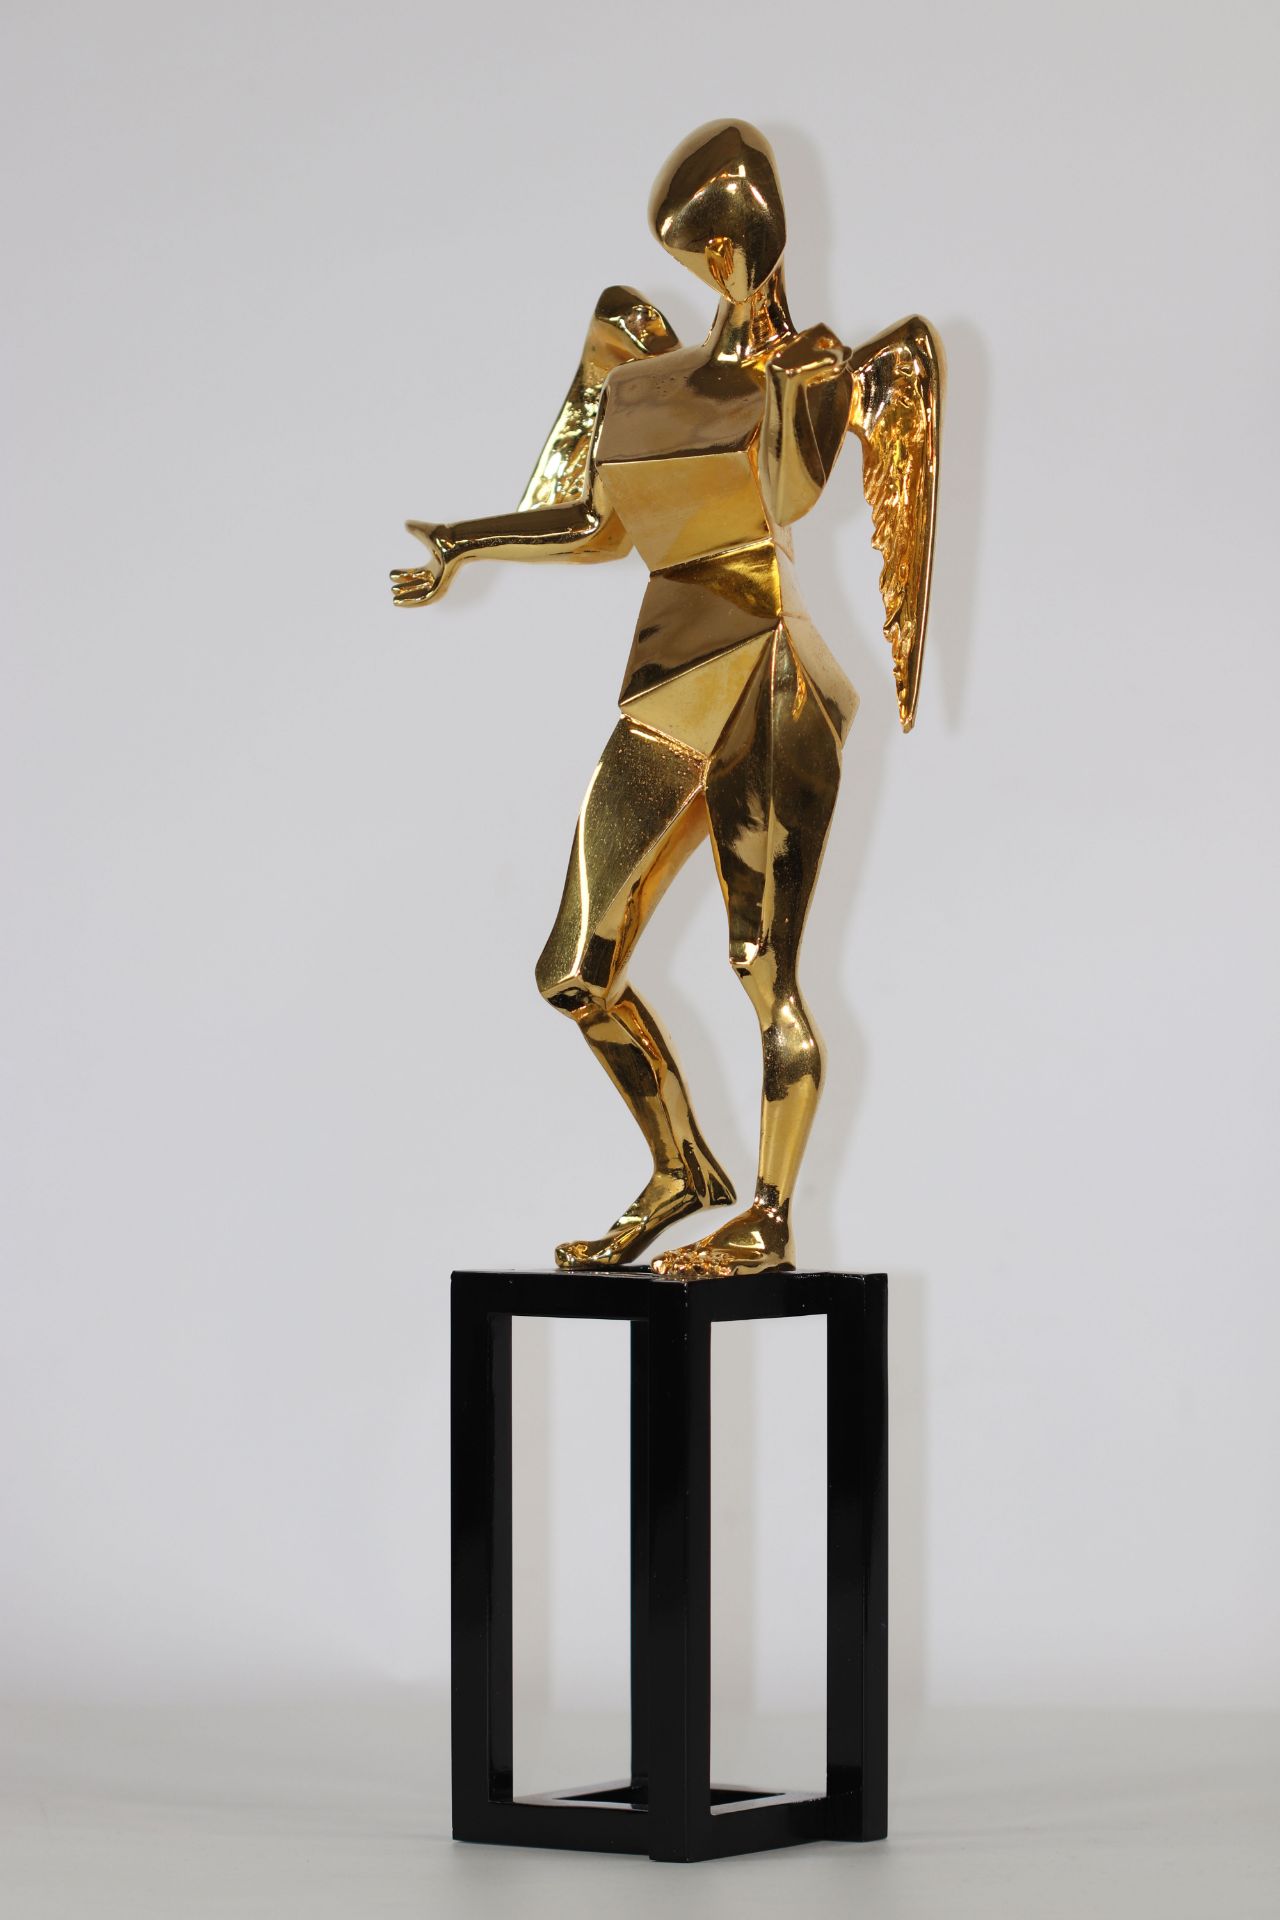 Salvador Dali The Cubist Angel 1983 Bronze gilded with 24 carat fine gold Signed"Dali" Numbered 938/